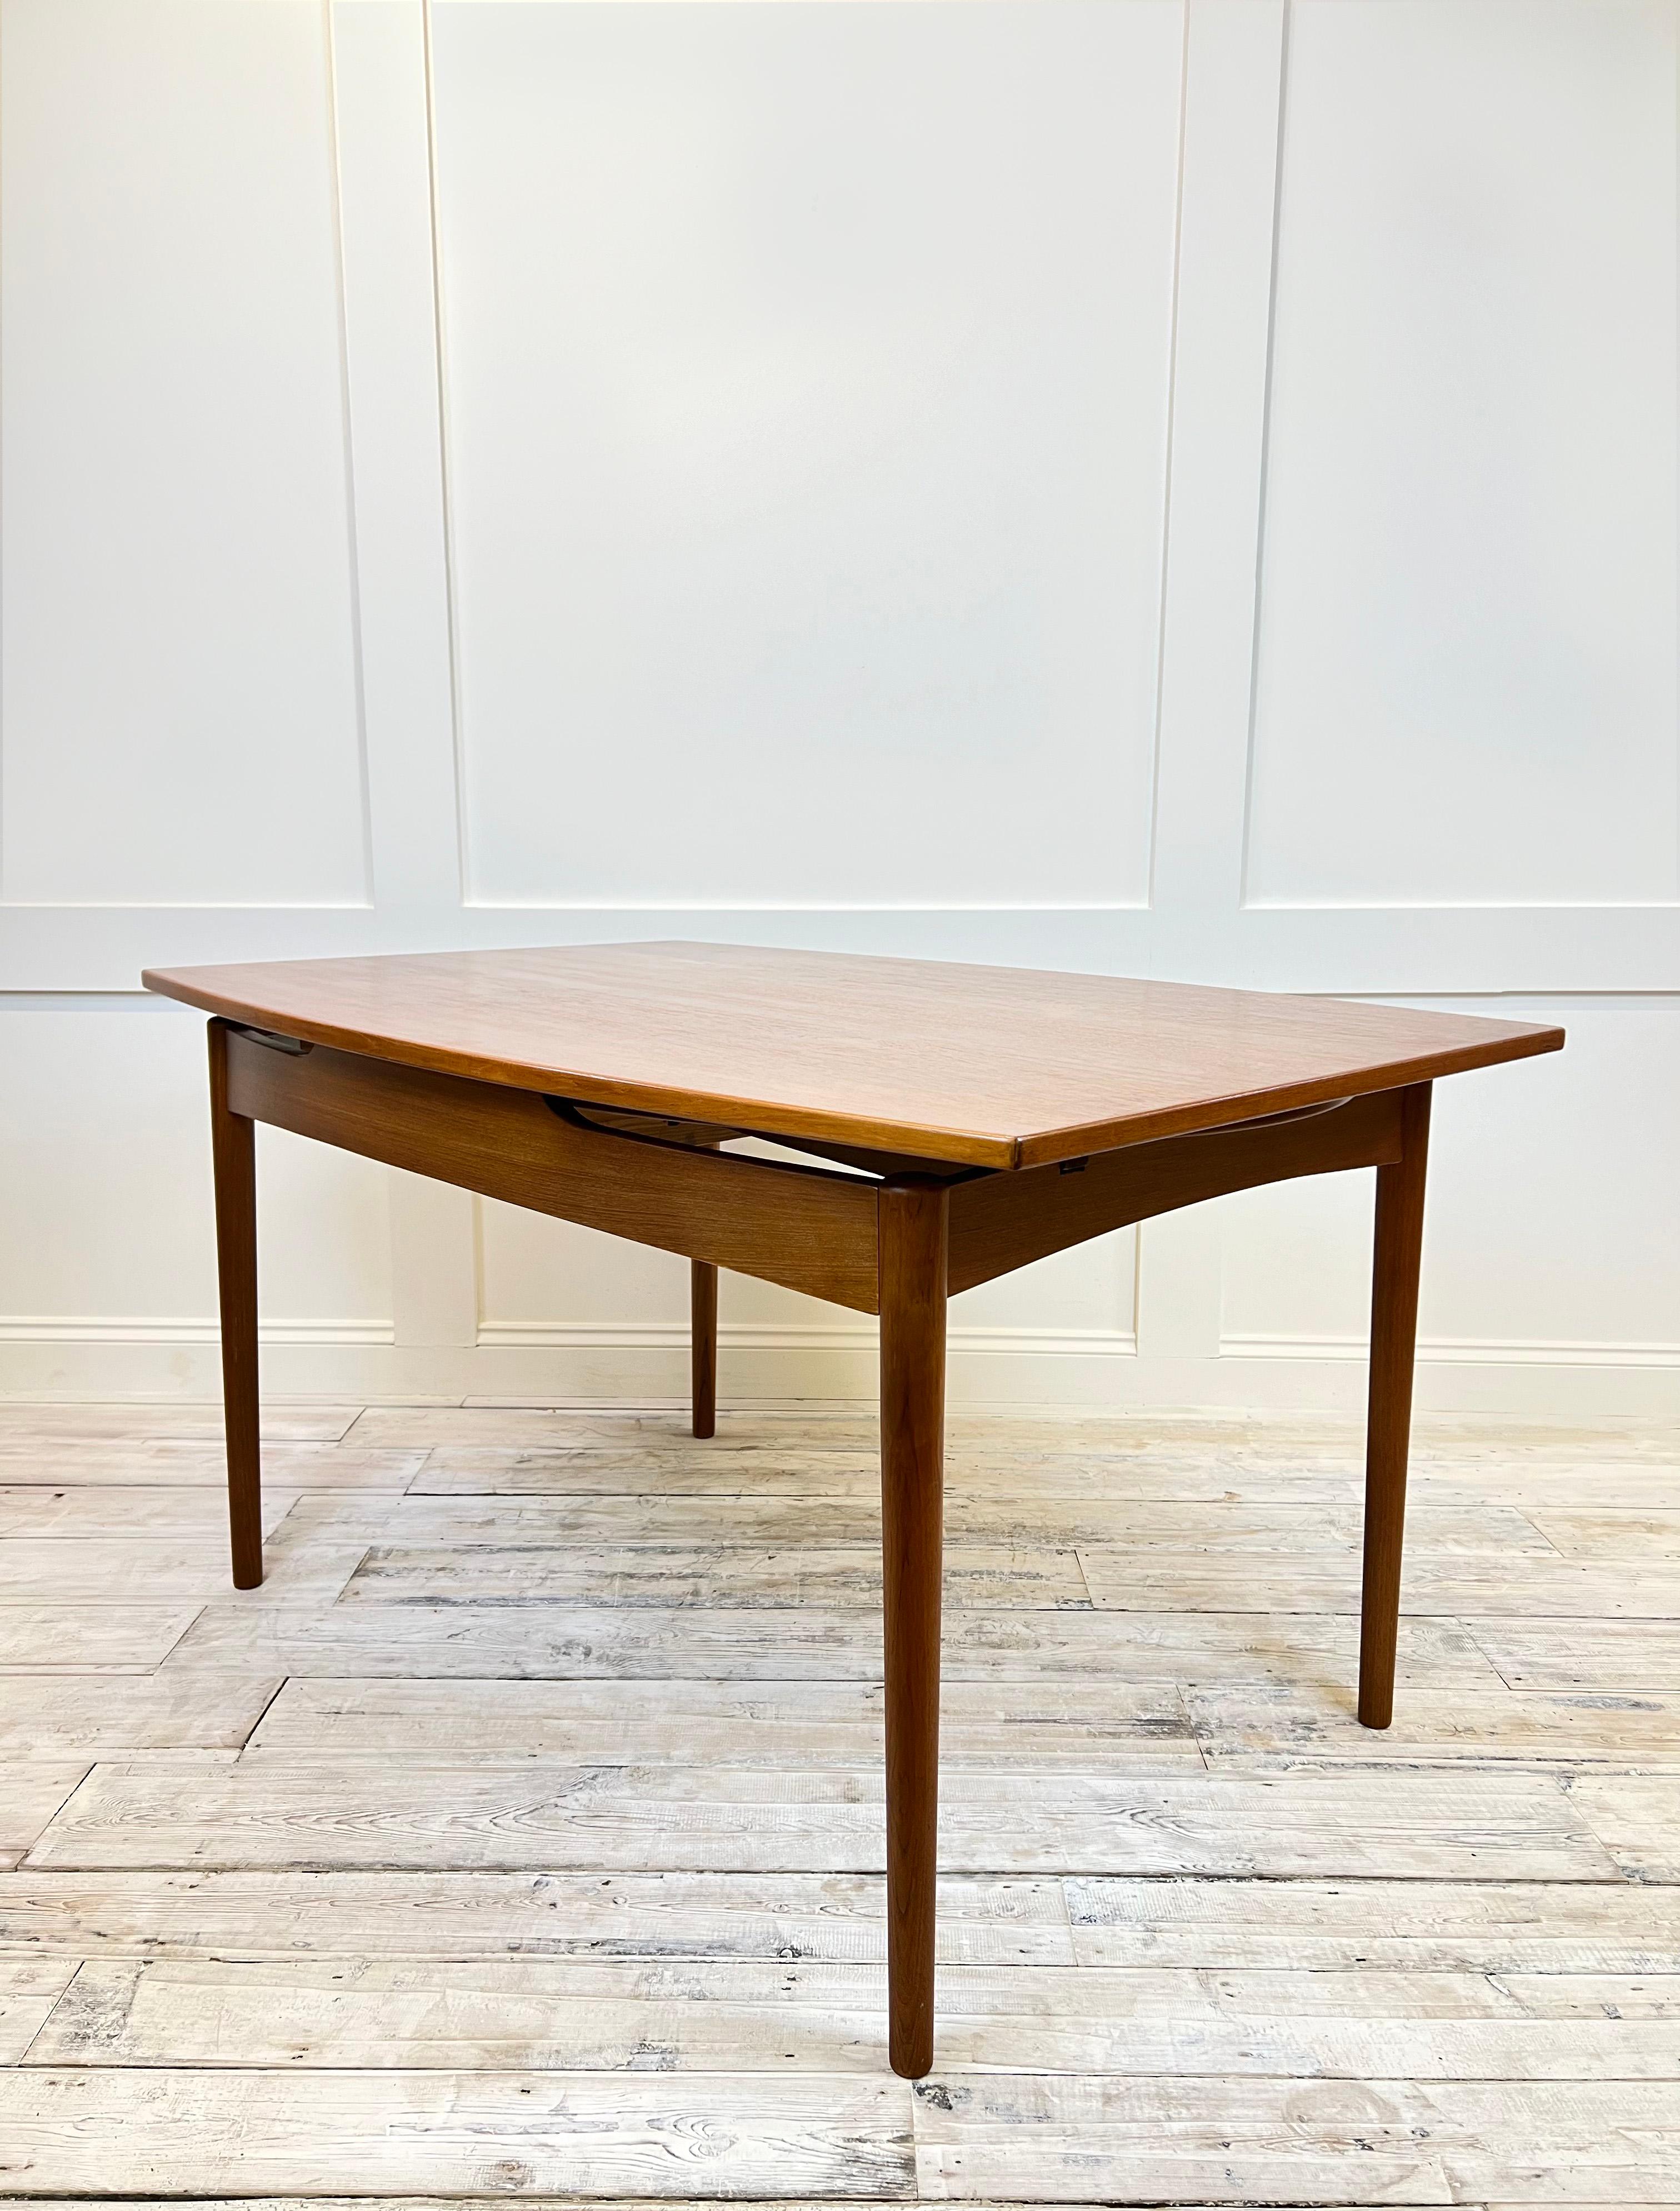 20th Century Teak Extendable Dining Table, G Plan UK c.1960's For Sale